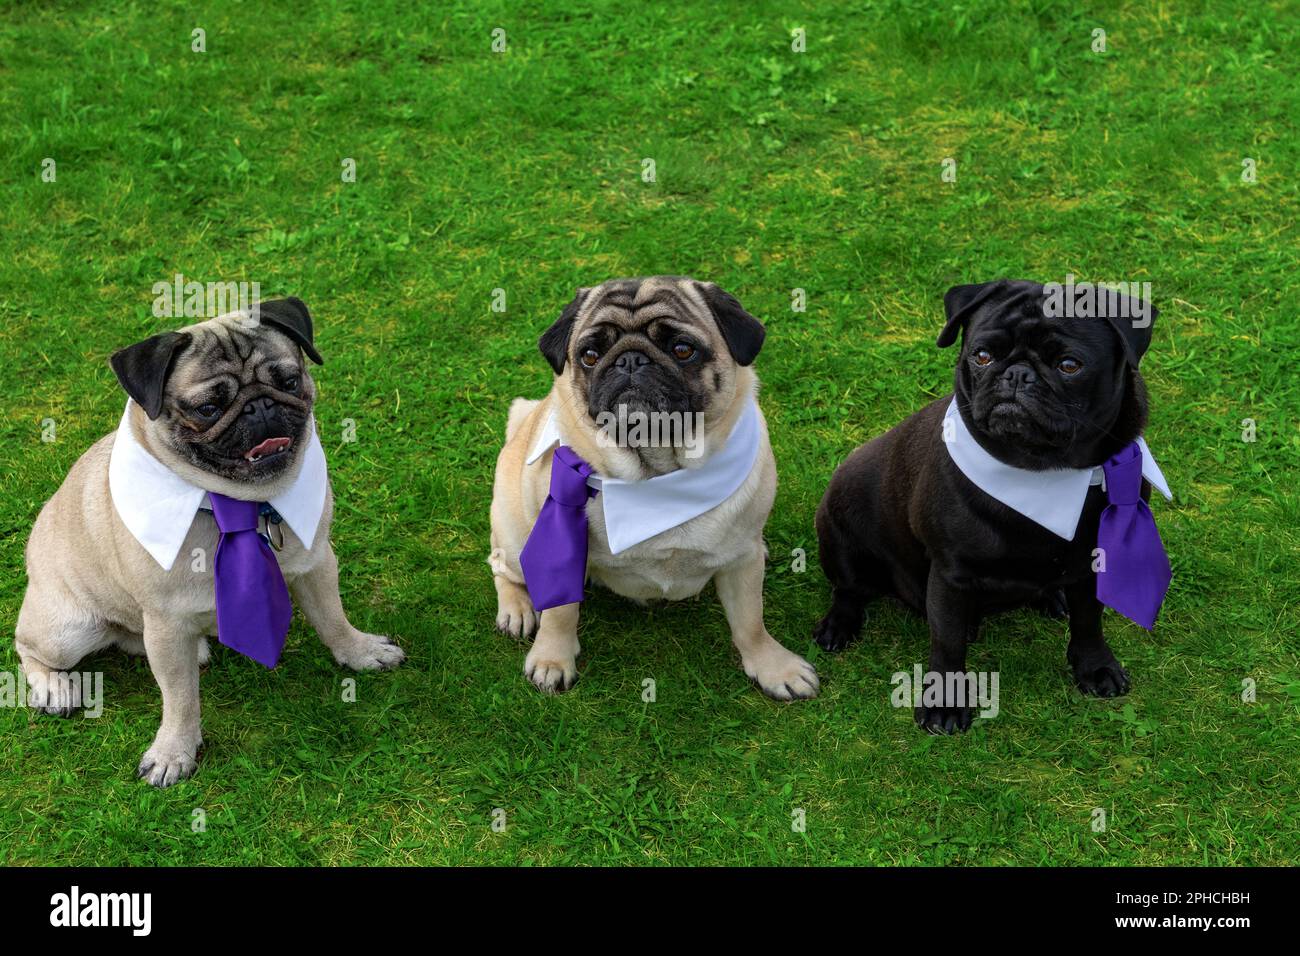 3 cute mops dogs on gras field dressed up in tie . Stock Photo